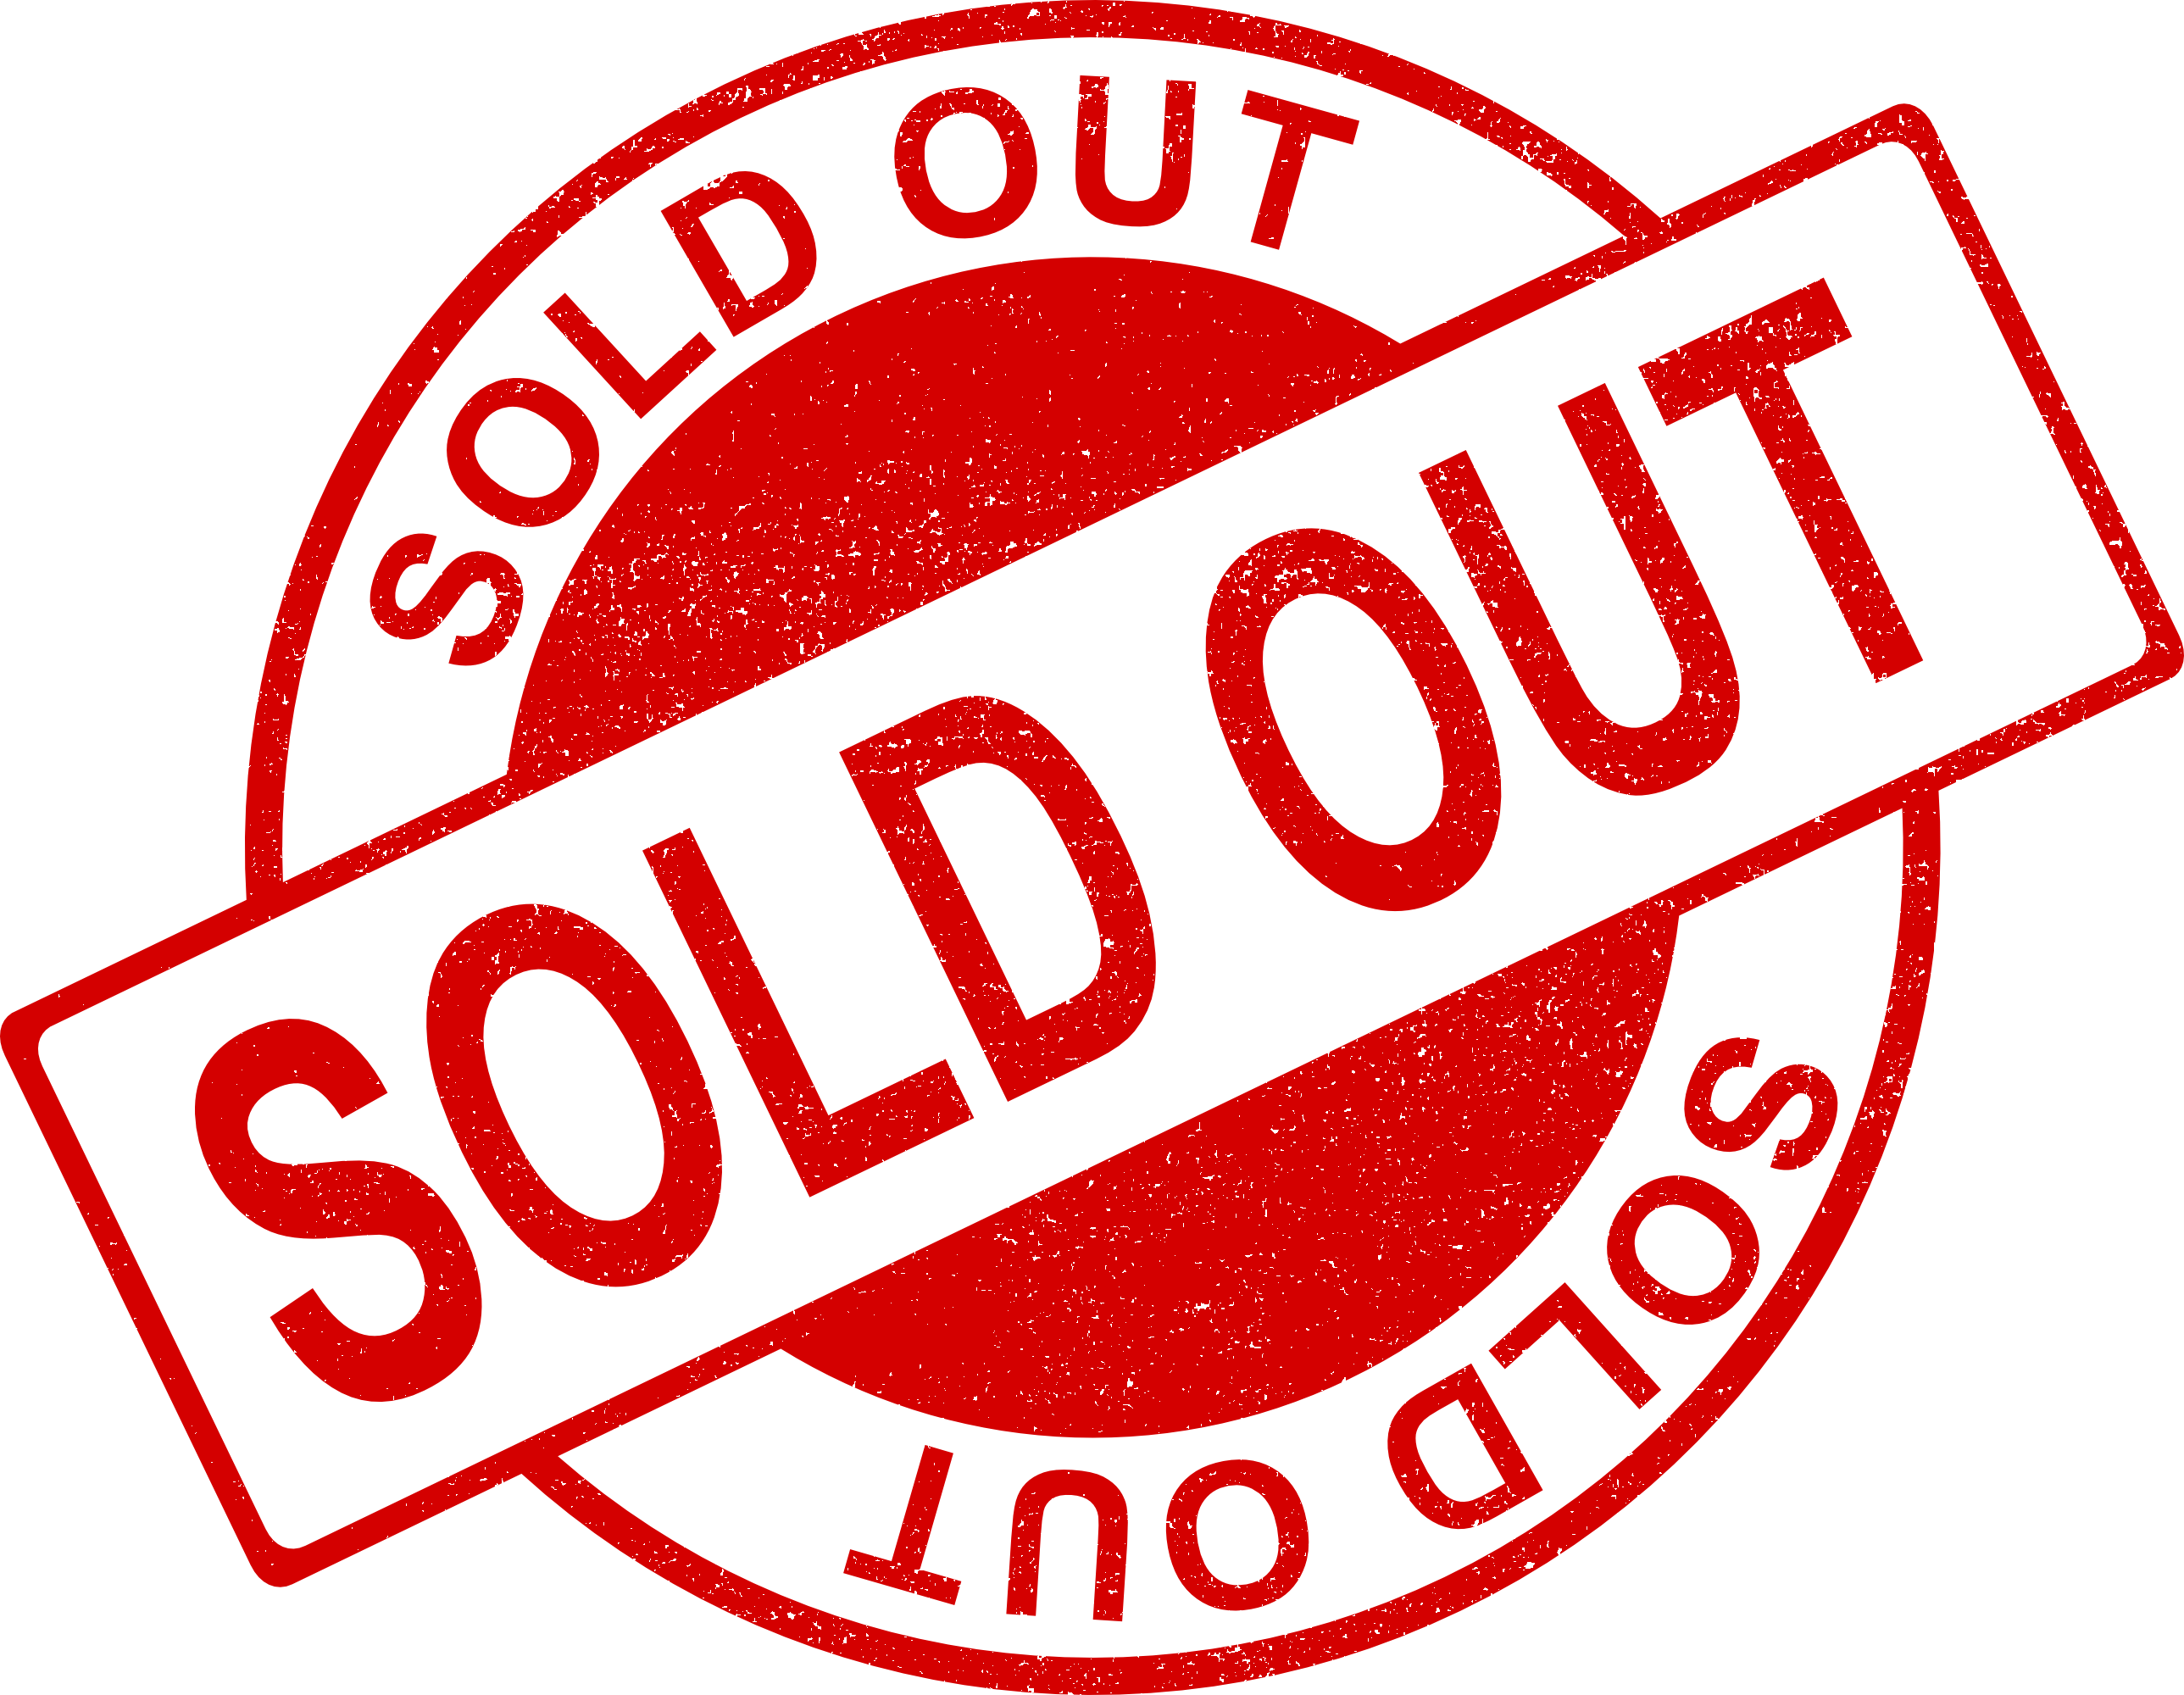 Sold Out Logo - Sold out logo png 4 PNG Image